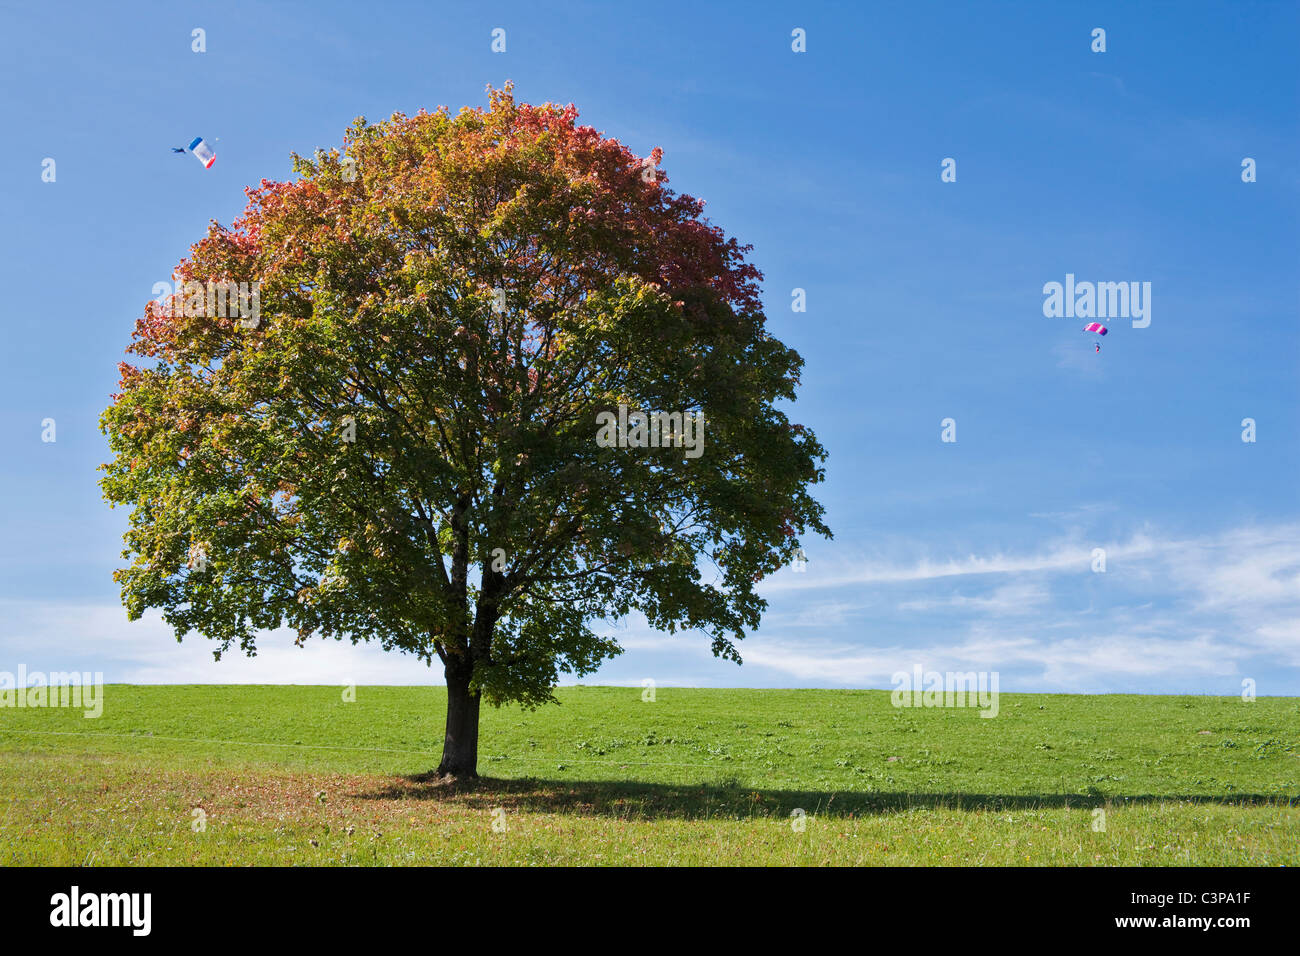 Germany, Bavaria, Maple tree in field, Paraglider in background Stock Photo